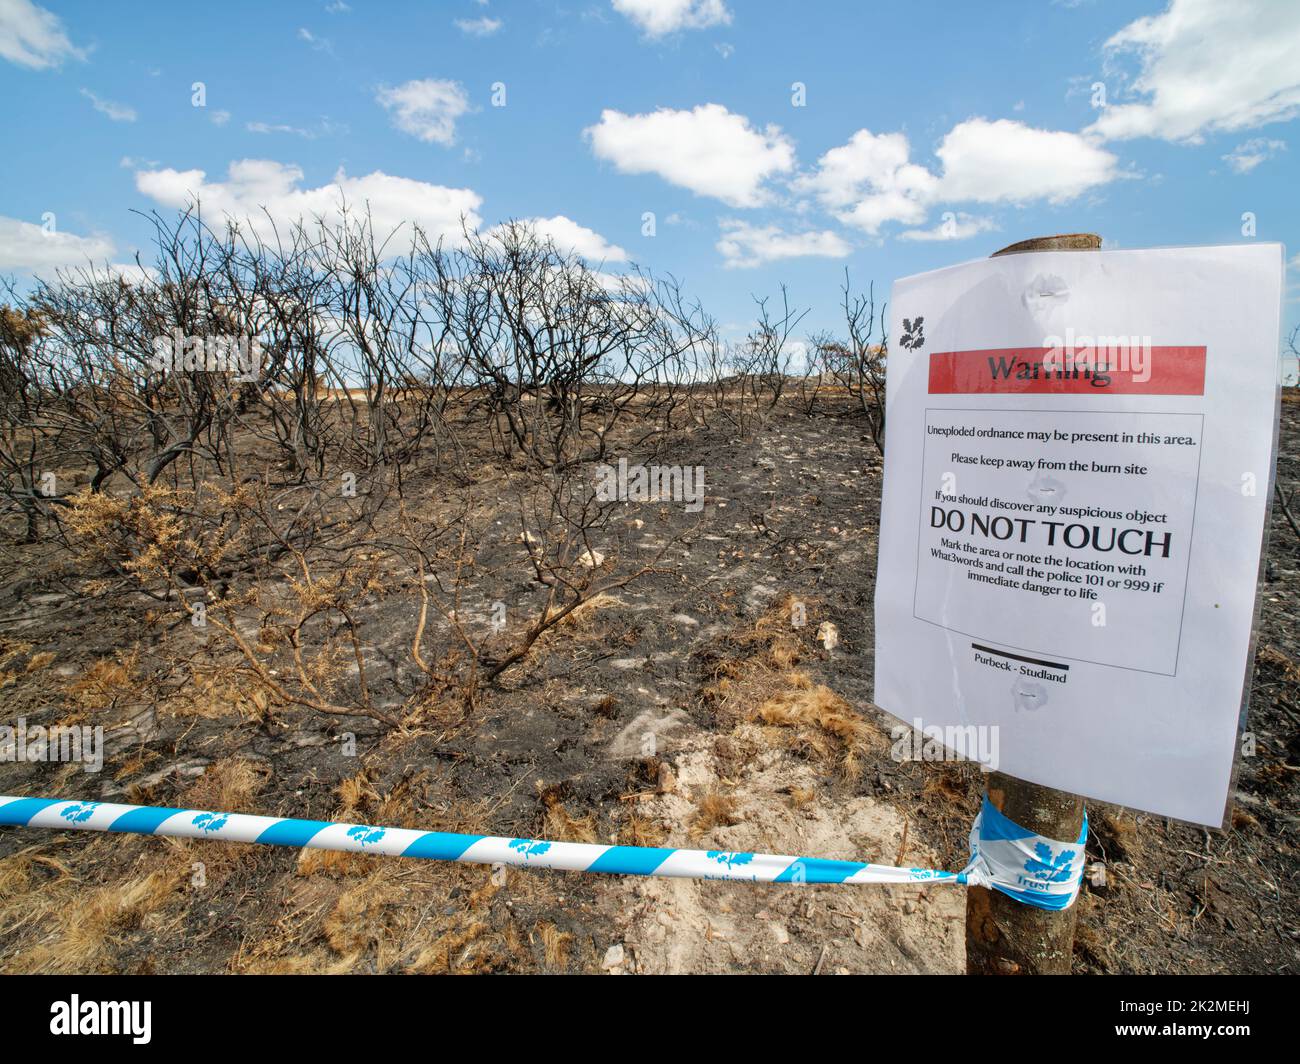 Warning of unexploded WW2 ordnance after some was found on heathland badly burnt by a major fire, Studland Heath, Isle of Purbeck, August 2022. Stock Photo